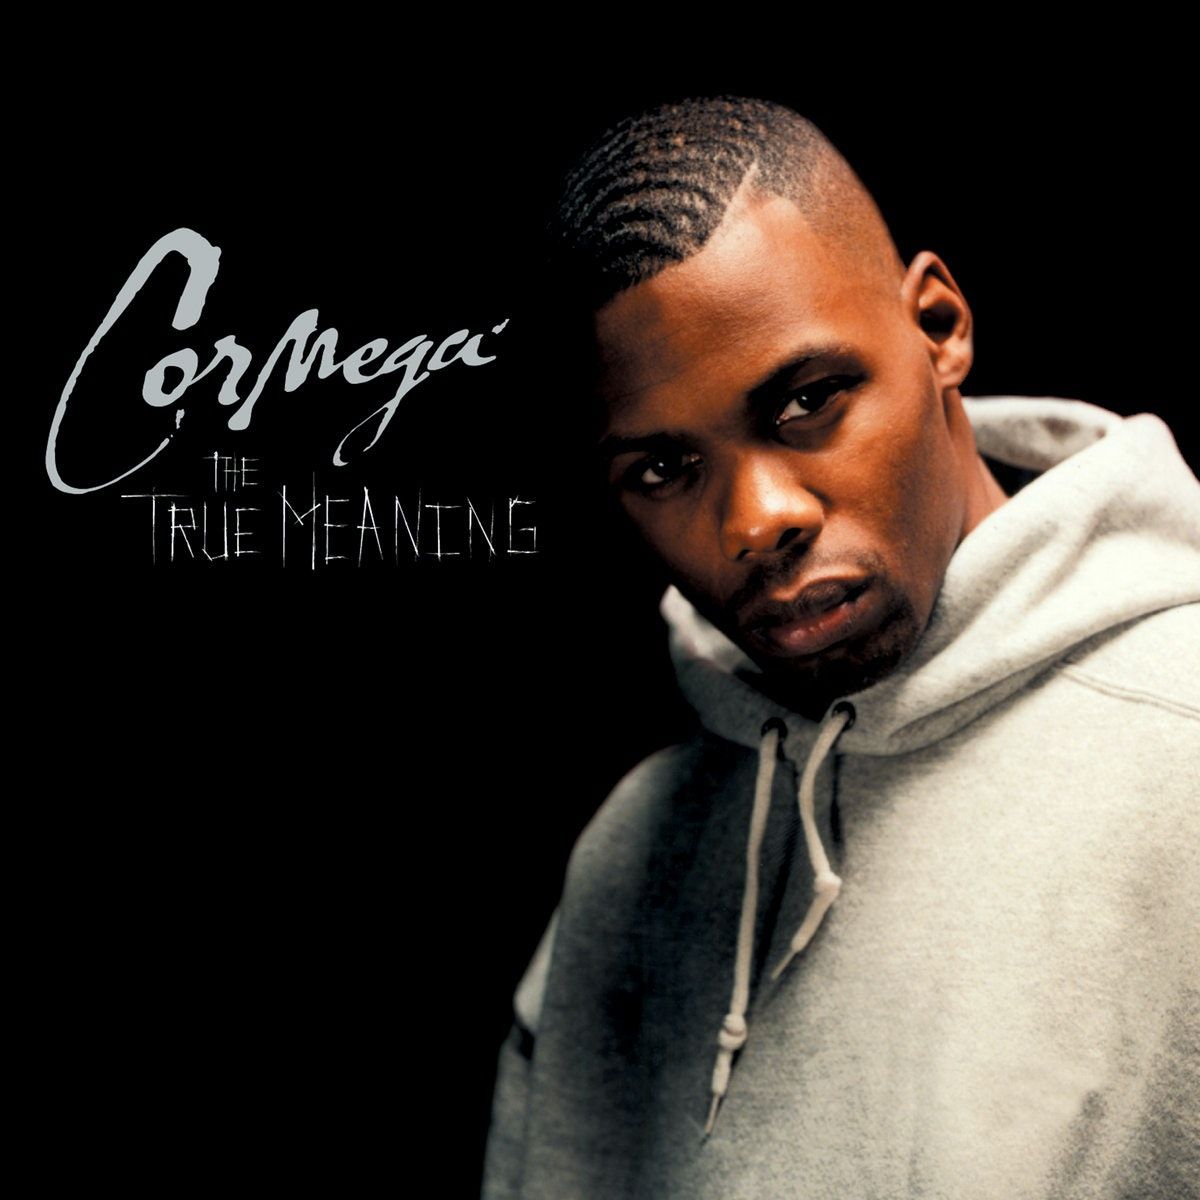 Side Salad: Cormega's The True Meaning